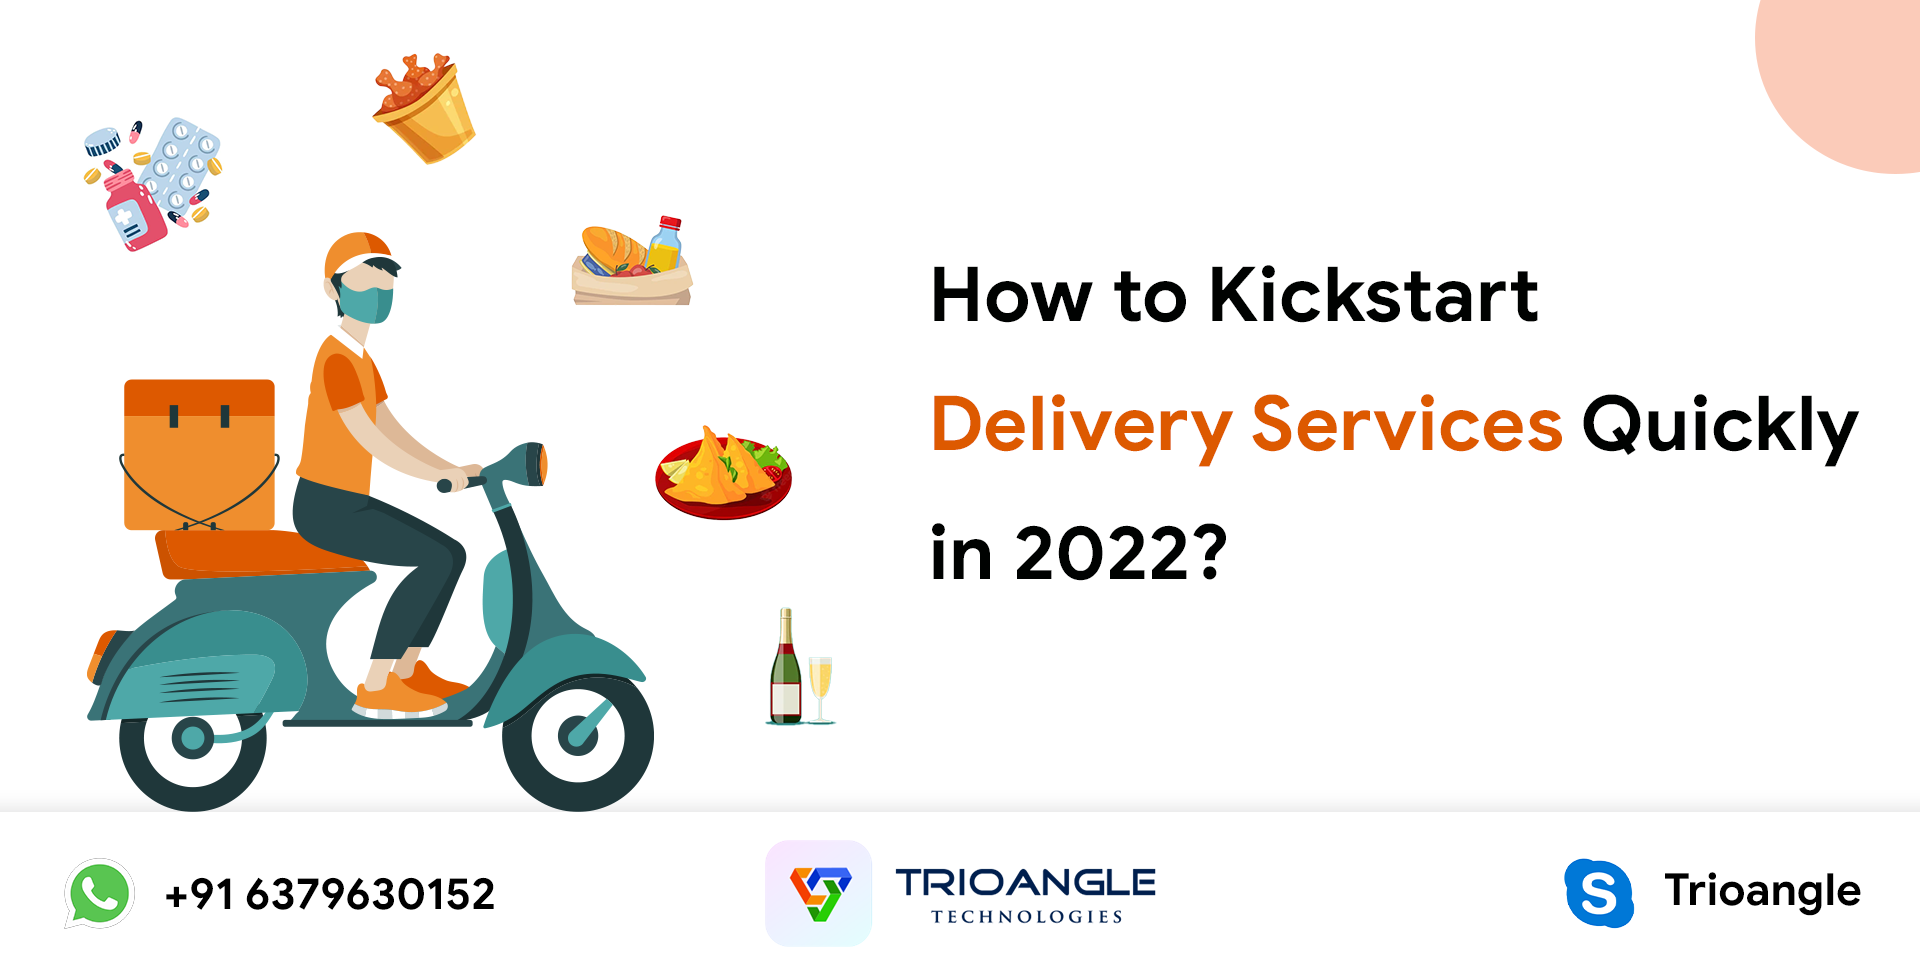 How to Kickstart Delivery Services Quickly in 2022?